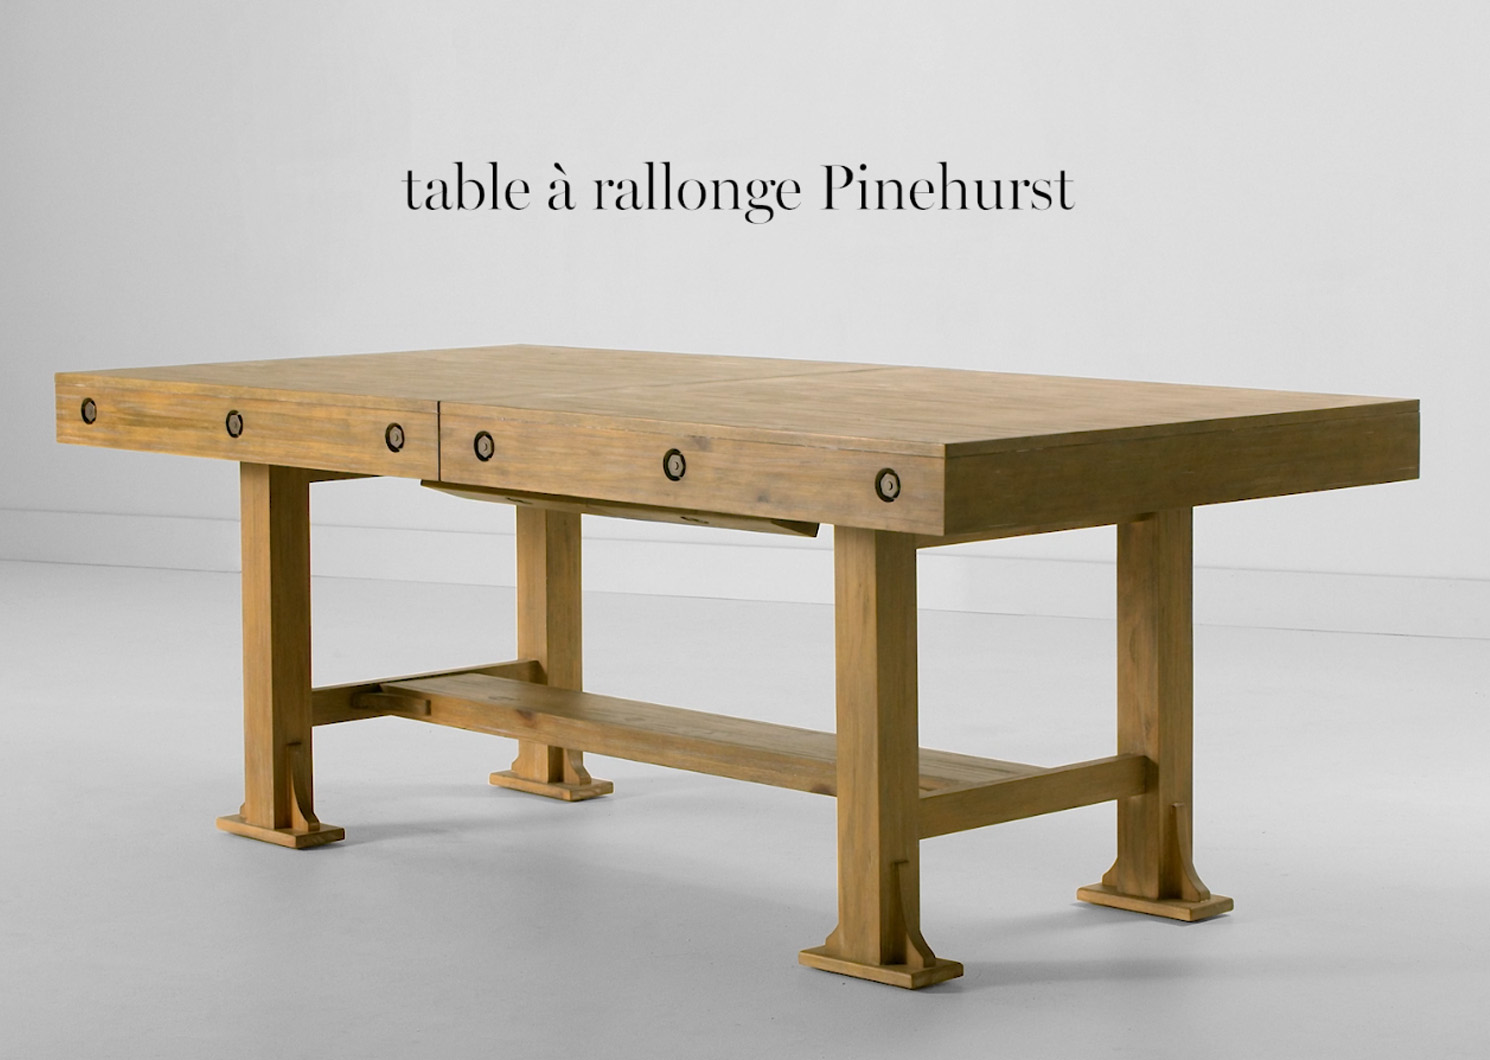 Table rall. rect. Pinehurst -Claire faon